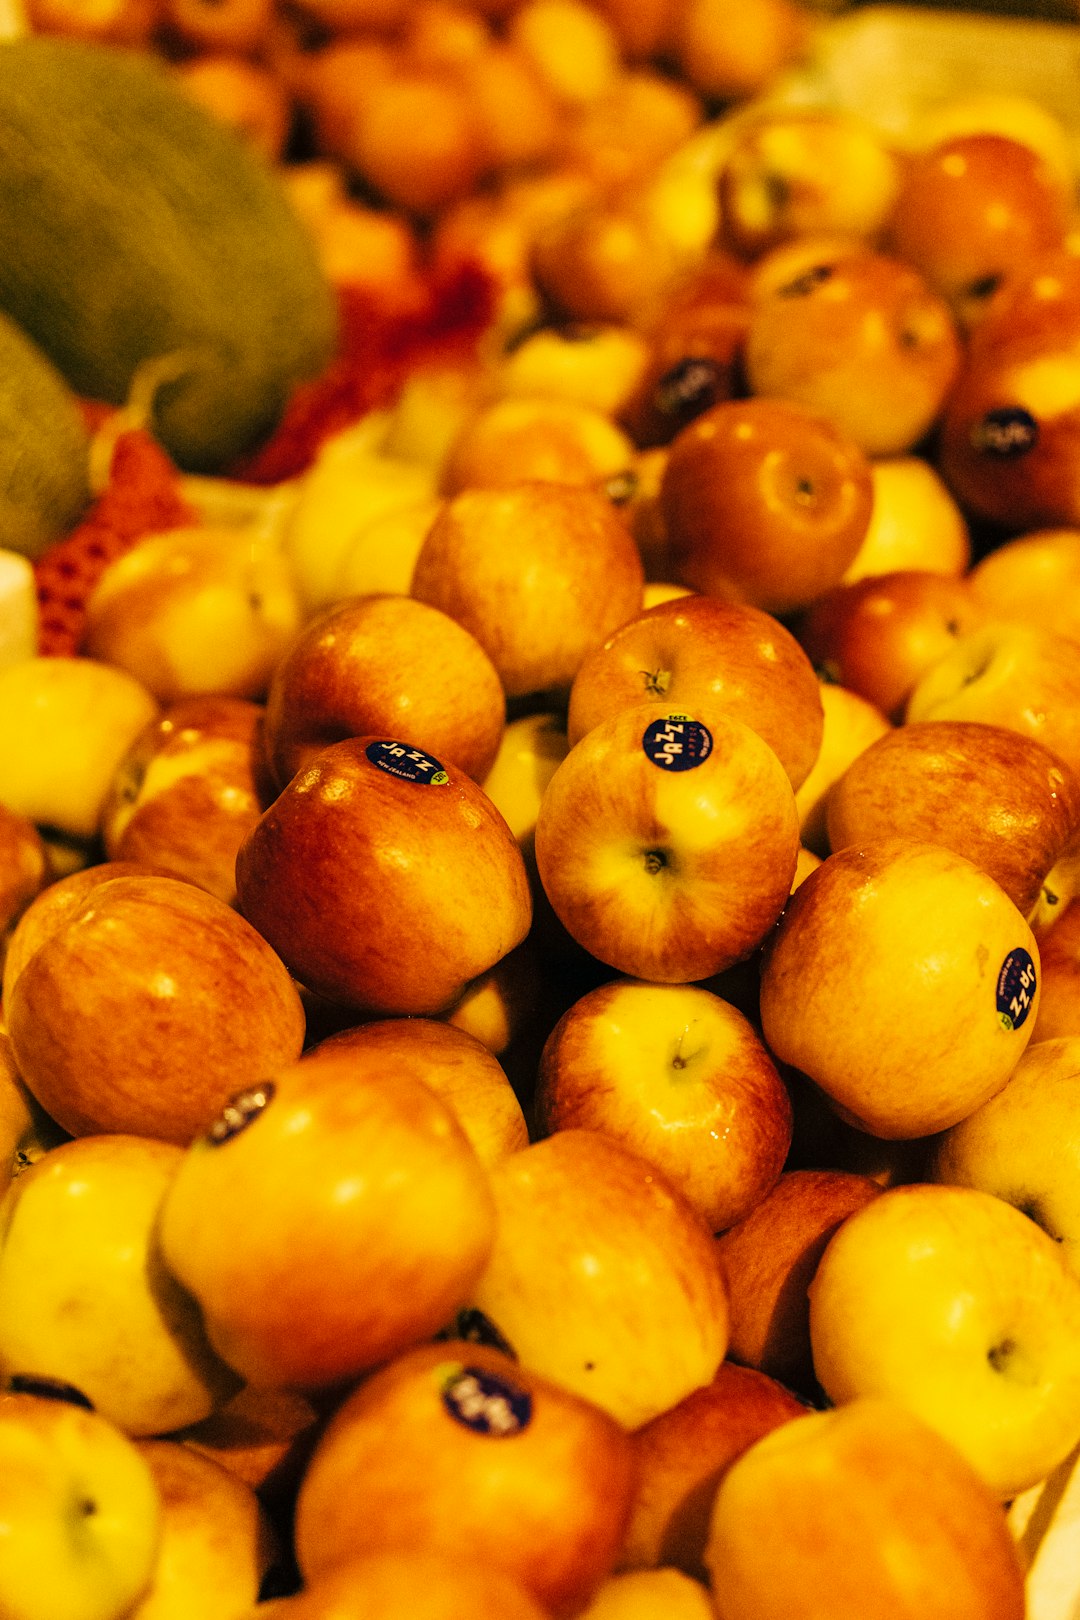 yellow and red apple fruits